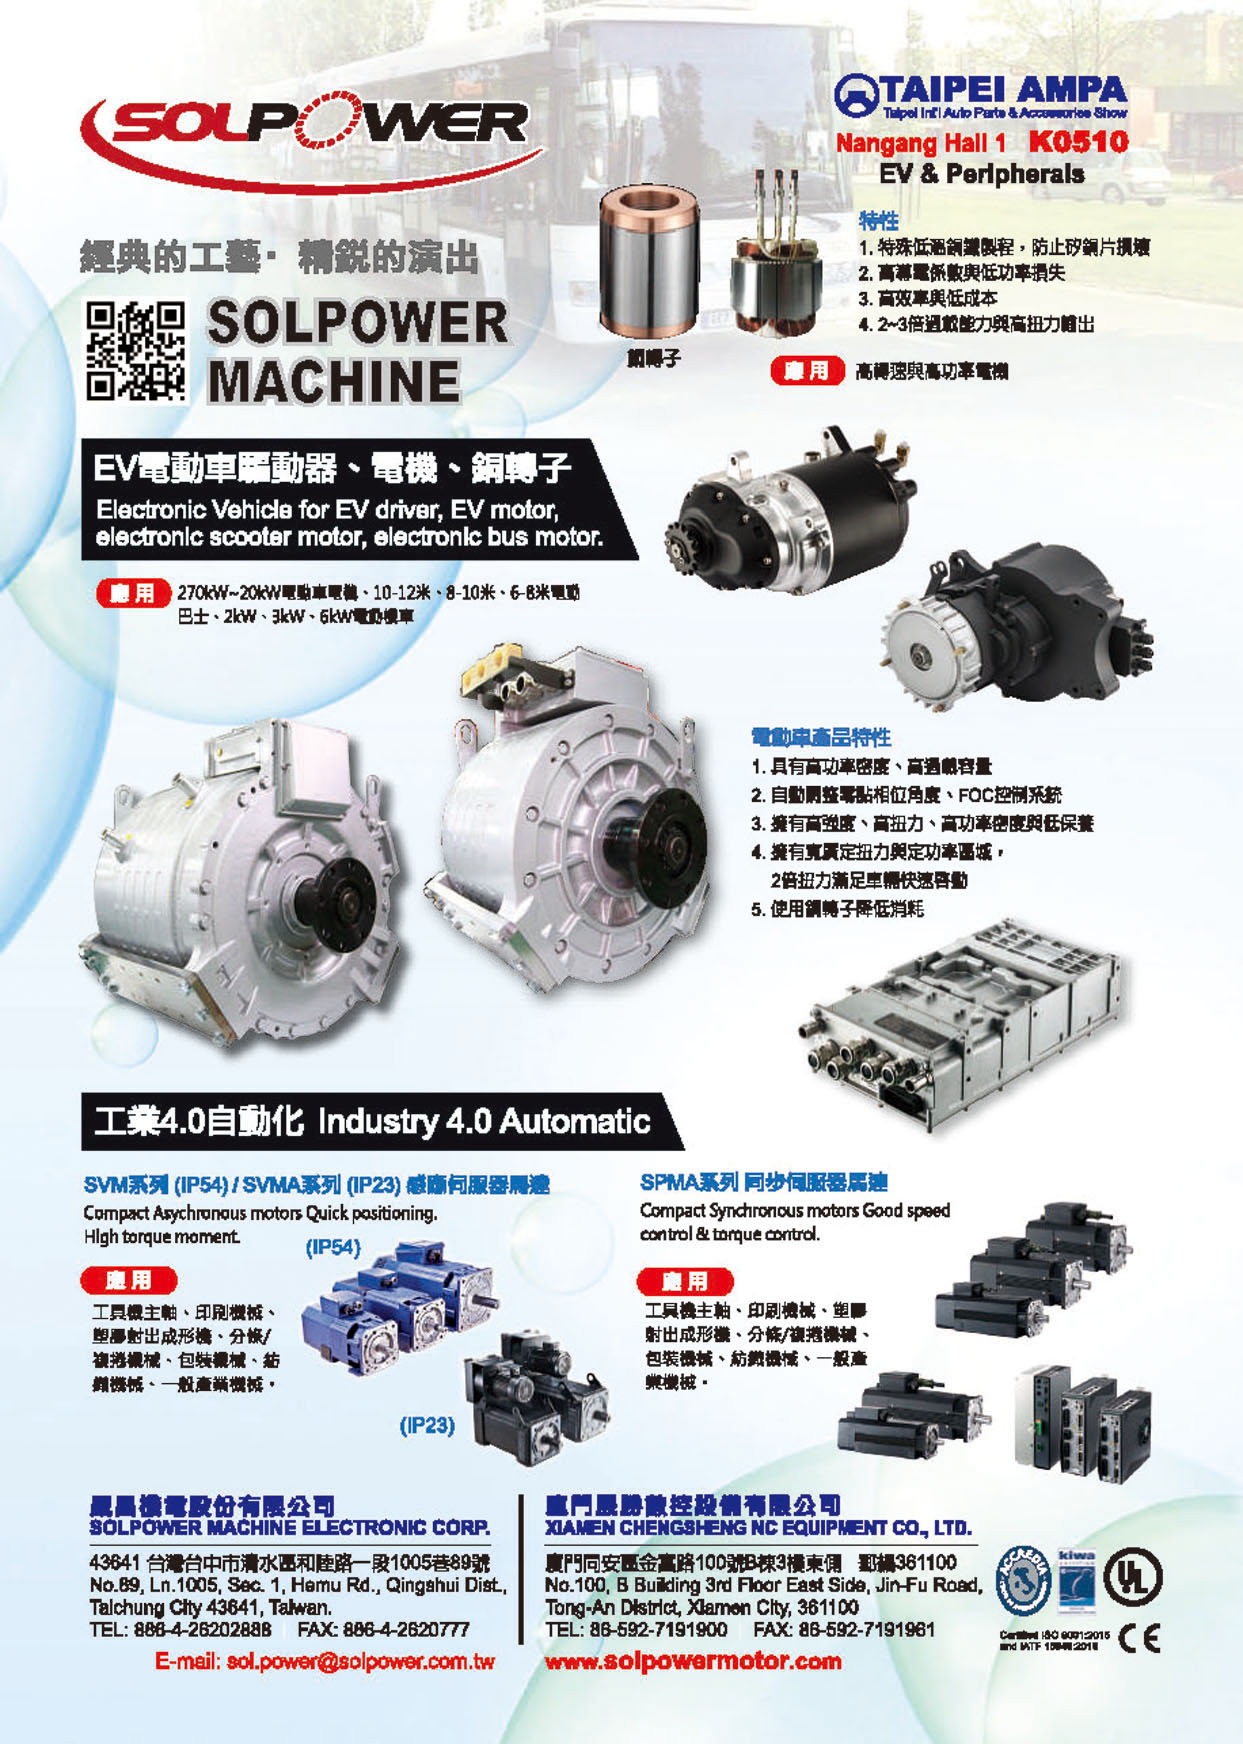 SOLPOWER MACHINE ELECTRONIC CORP.